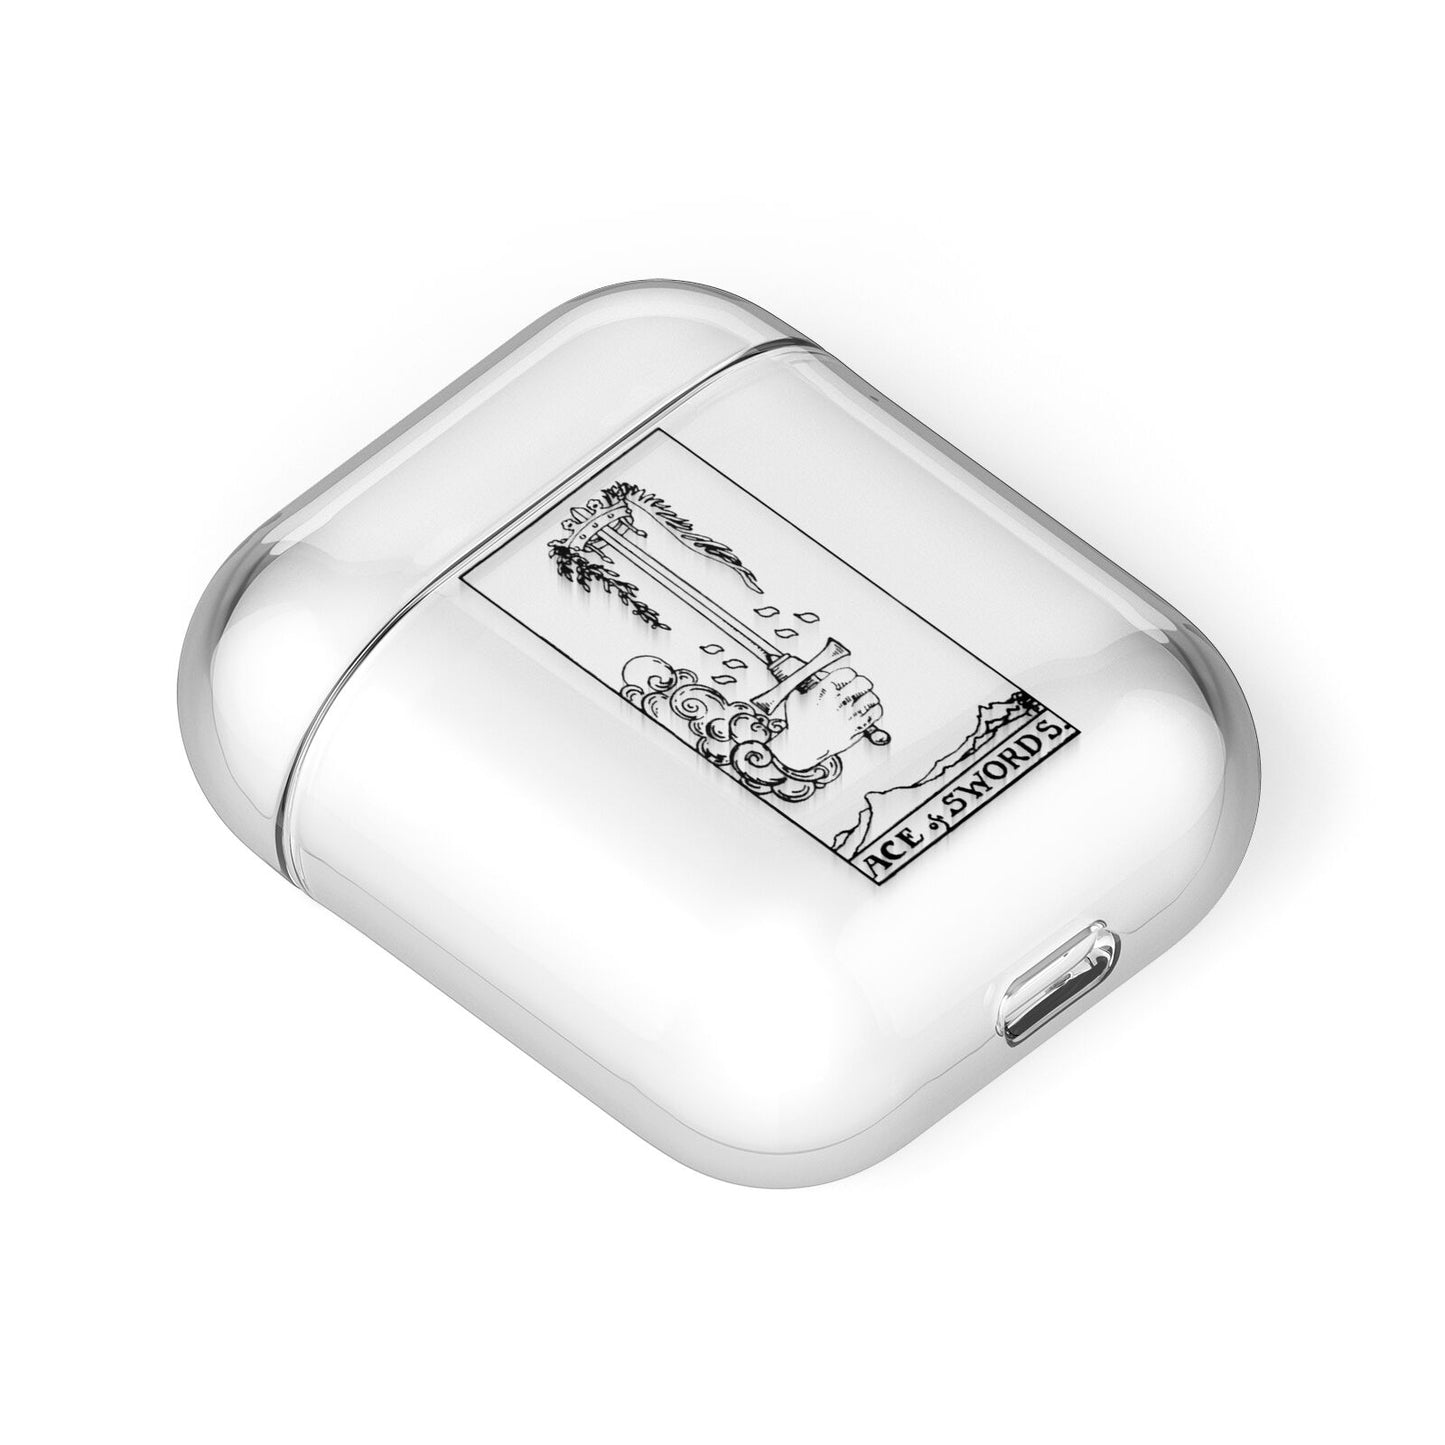 Ace of Swords Monochrome AirPods Case Laid Flat